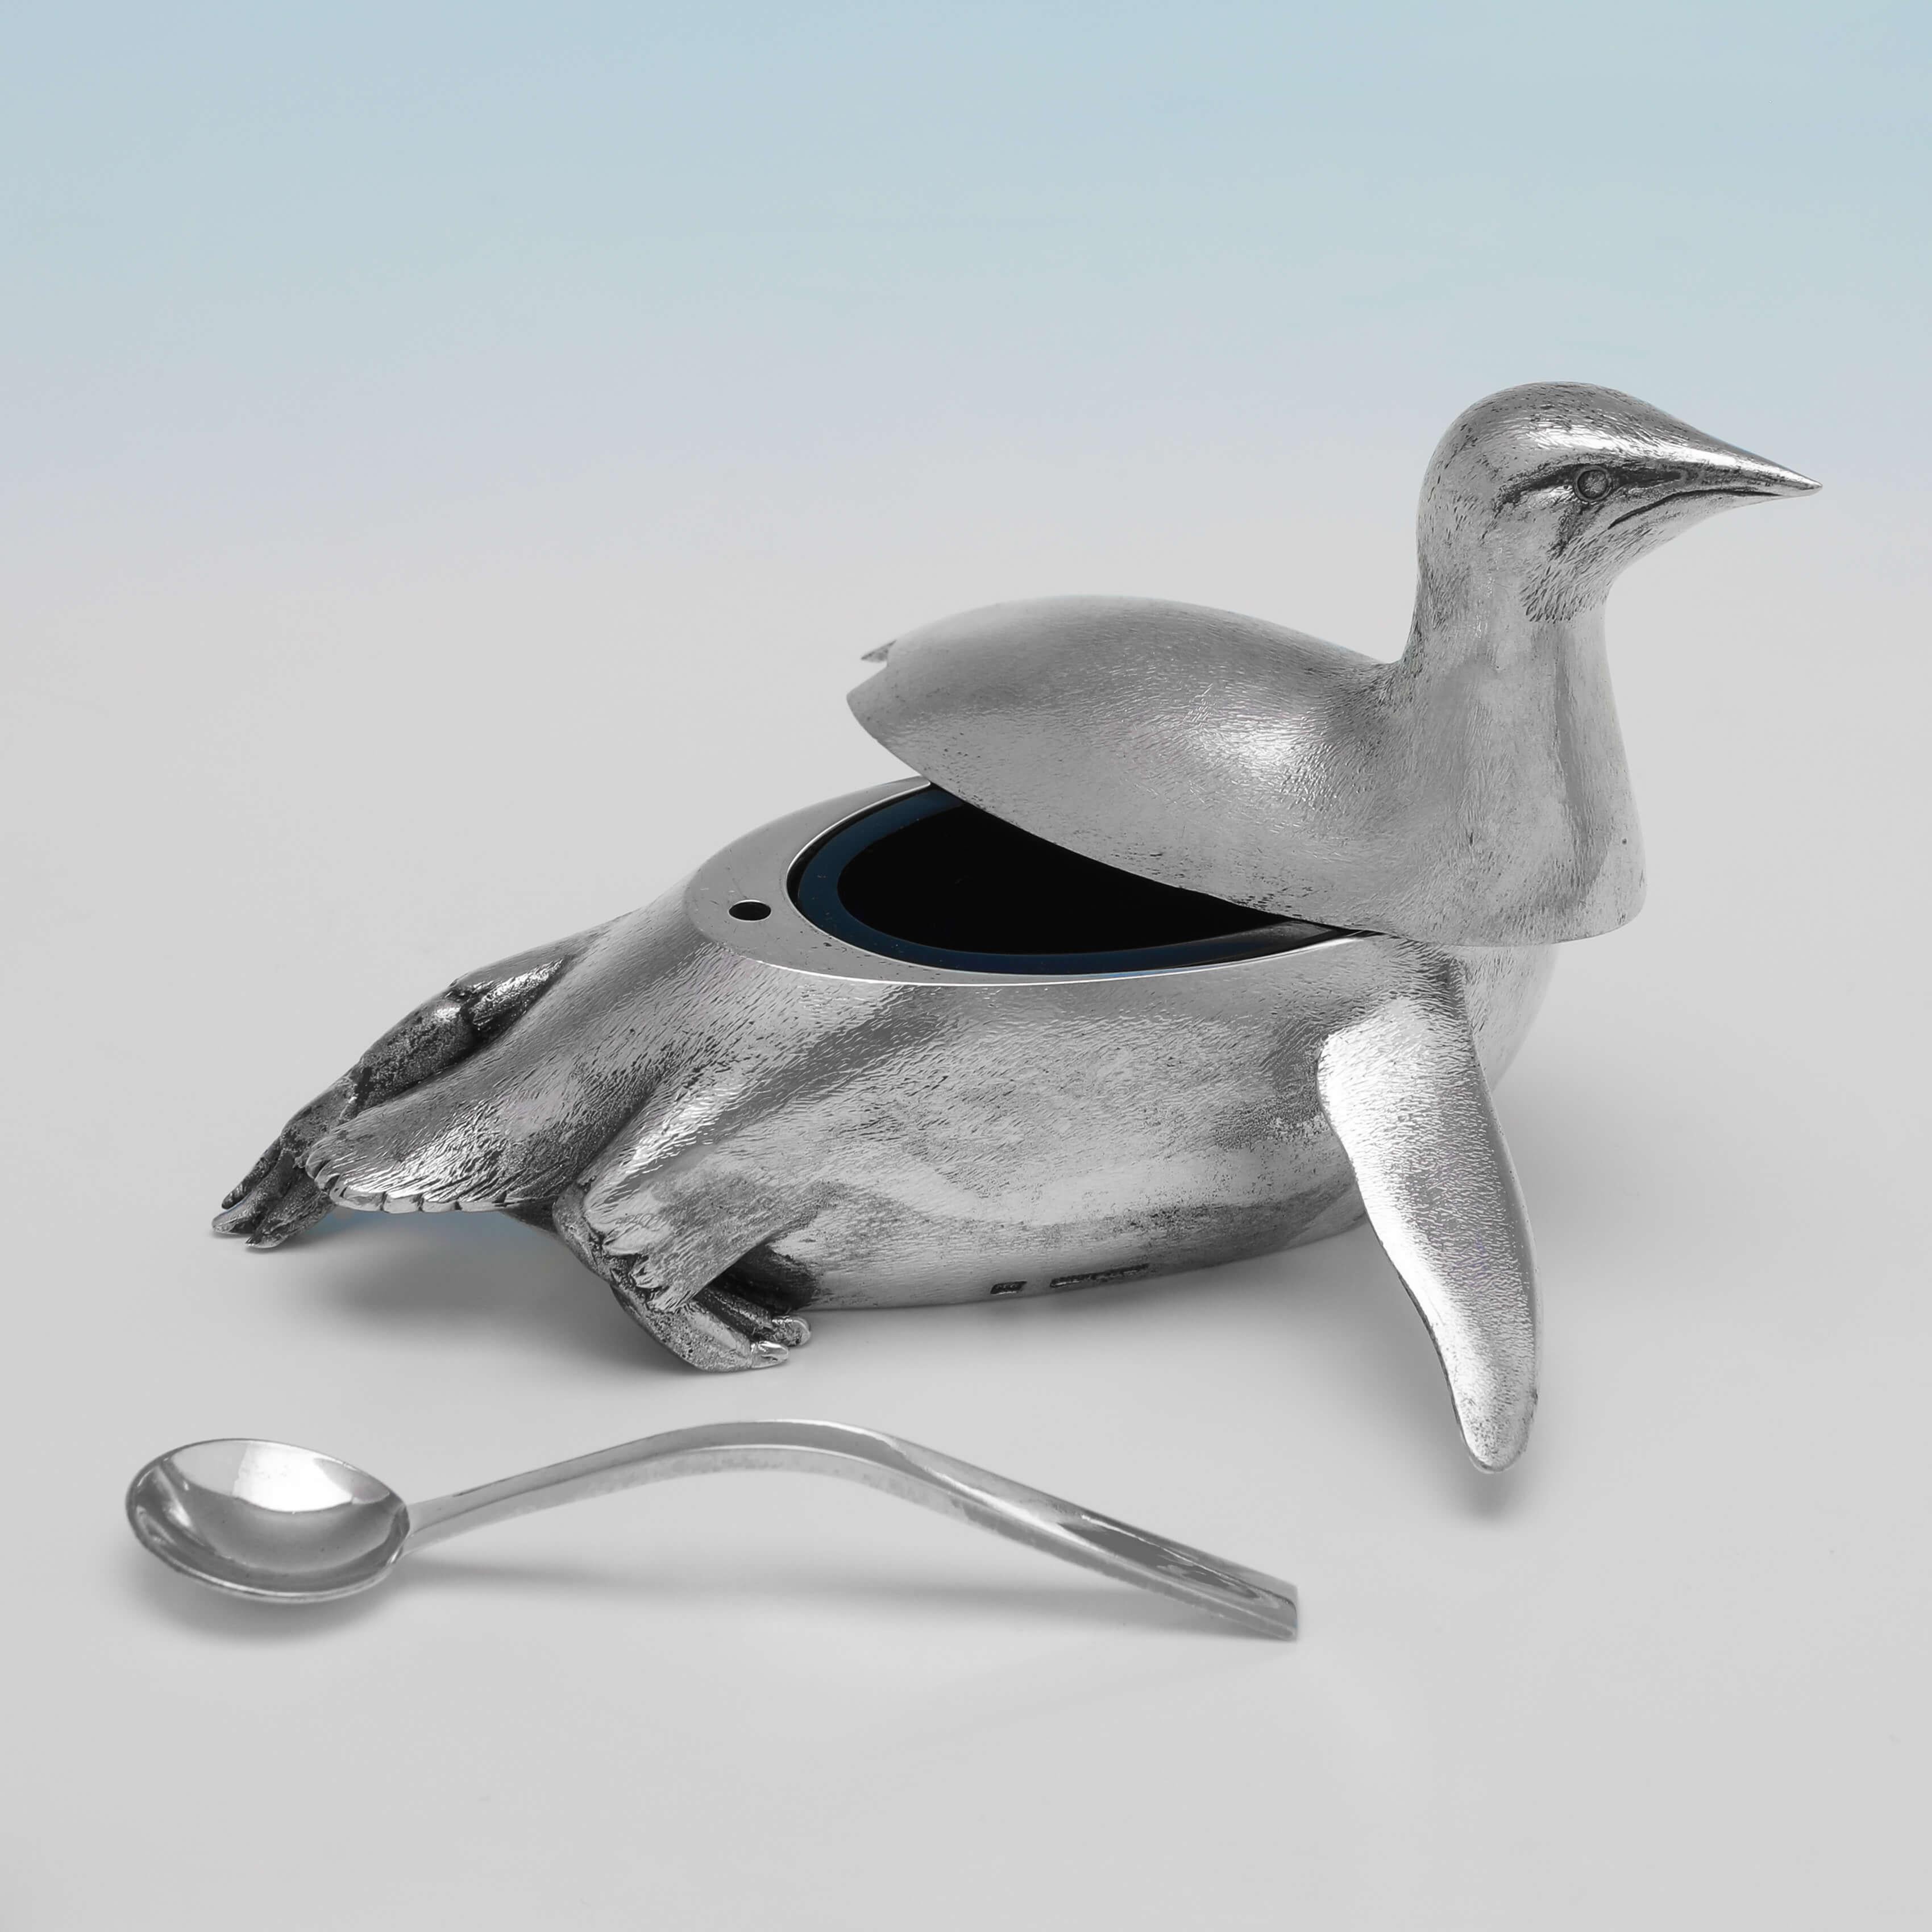 Hallmarked in London in 1996 by Meiling & Gartrell, this wonderful, and very charming, sterling silver condiment set, is modelled to resemble Emperor Penguins. The taller penguin (the salt) measures 3.75